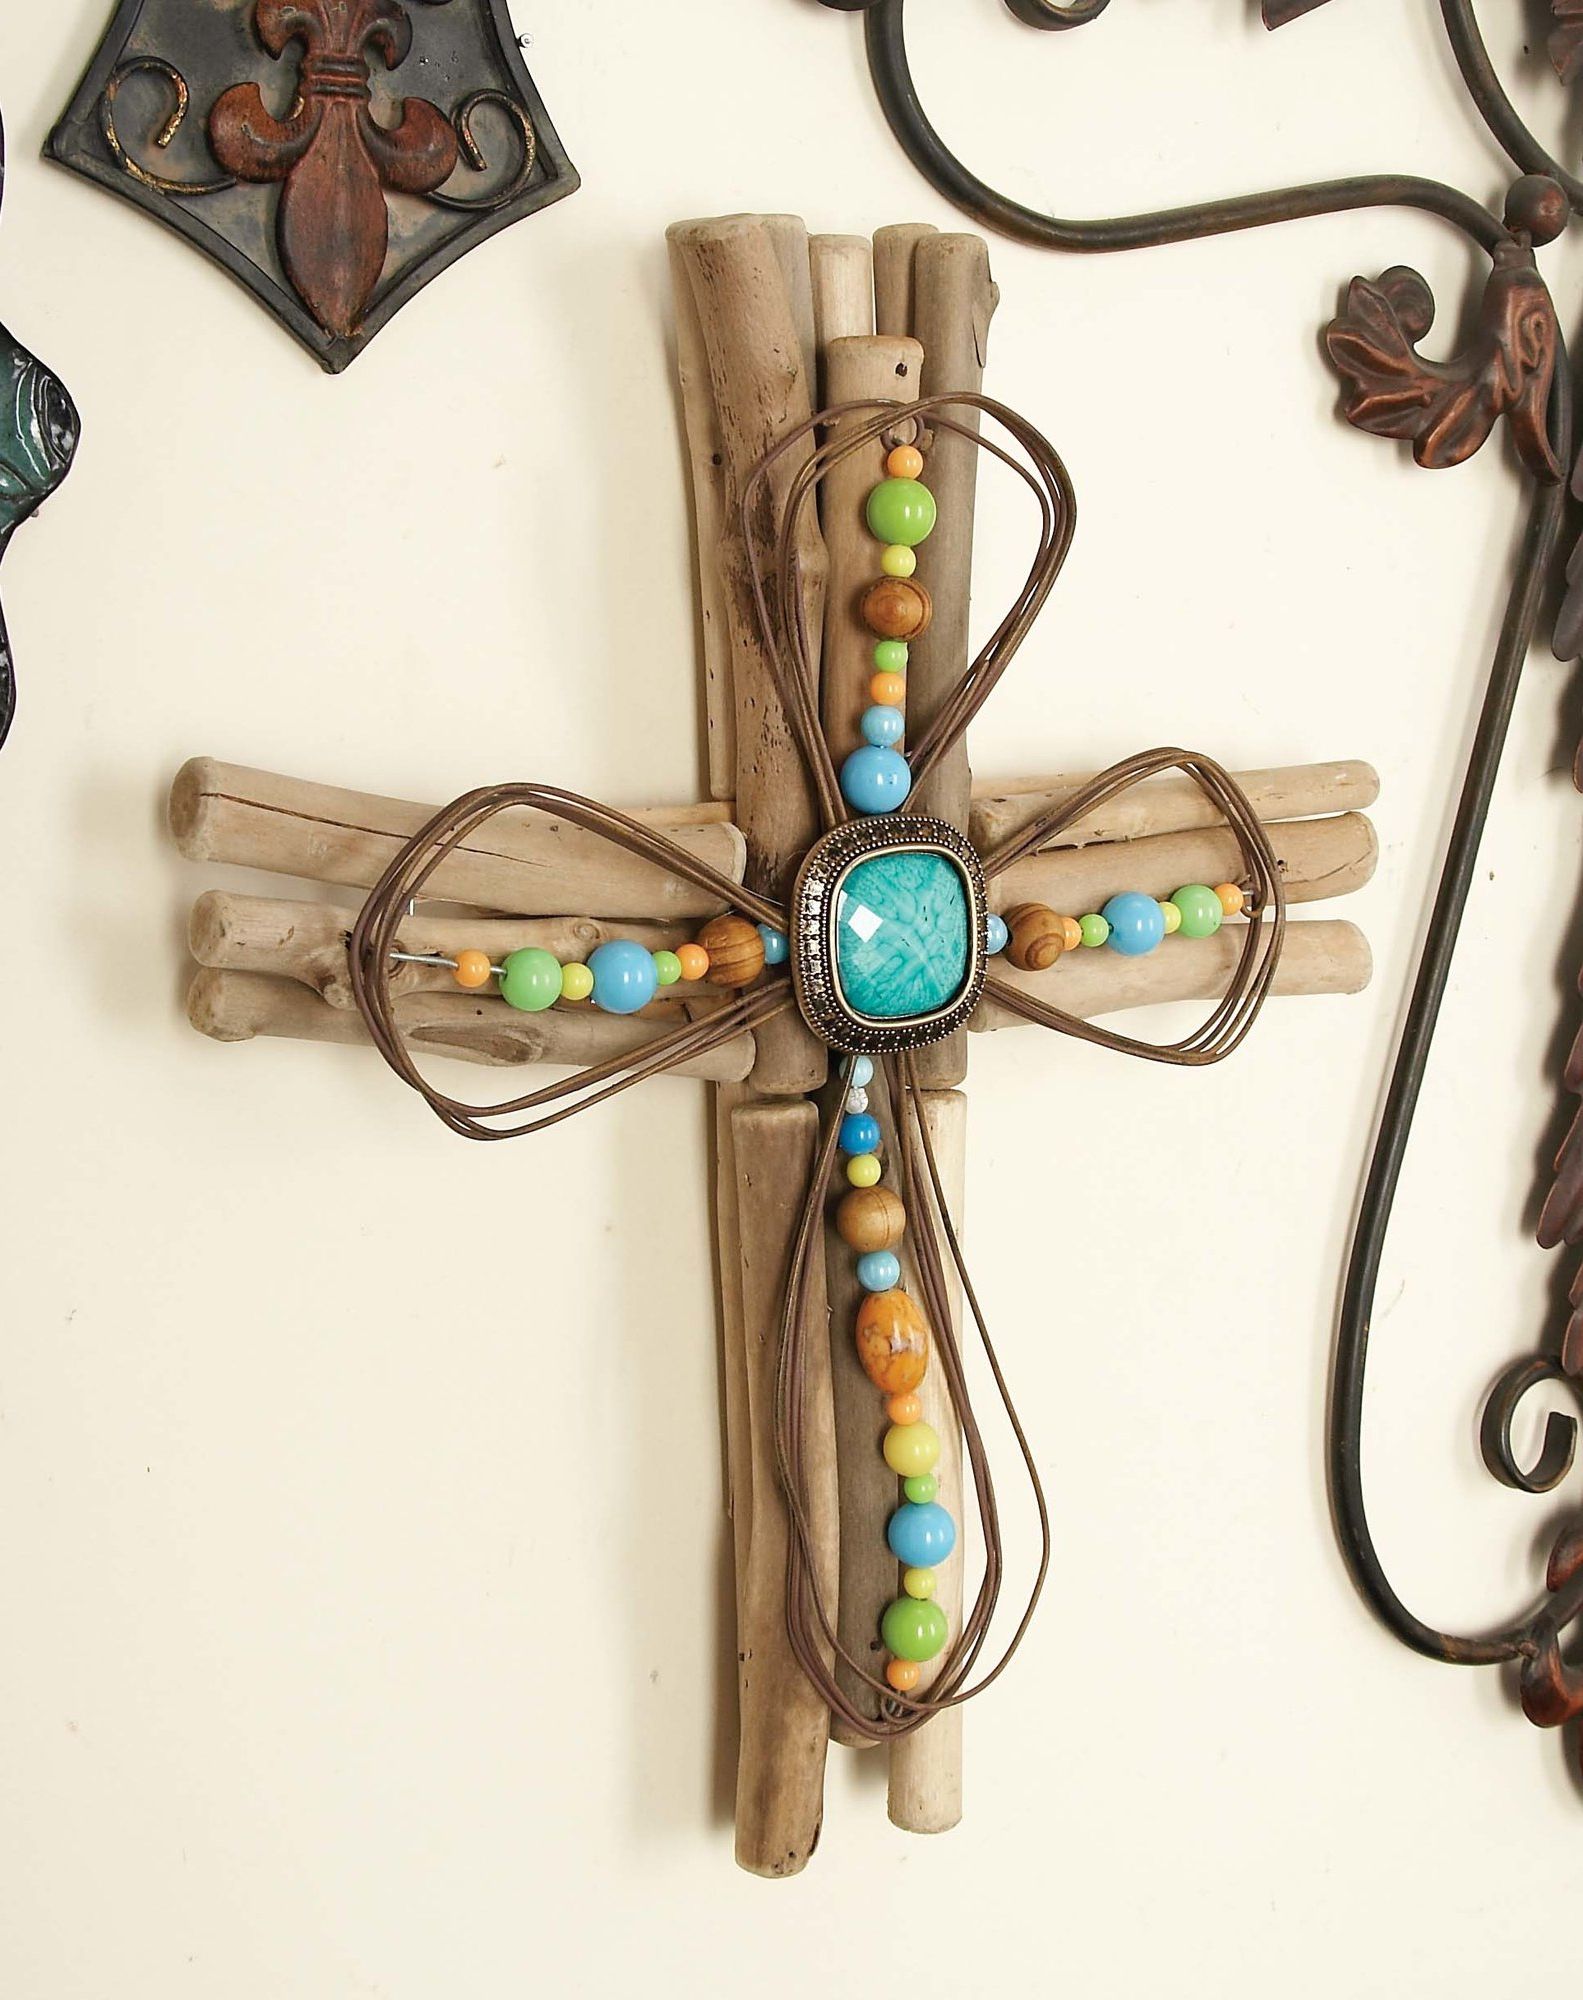 Wall Decor By Cole & Grey For Preferred Cole & Grey Wood And Metal Cross Wall Decor Set Of  (View 9 of 20)